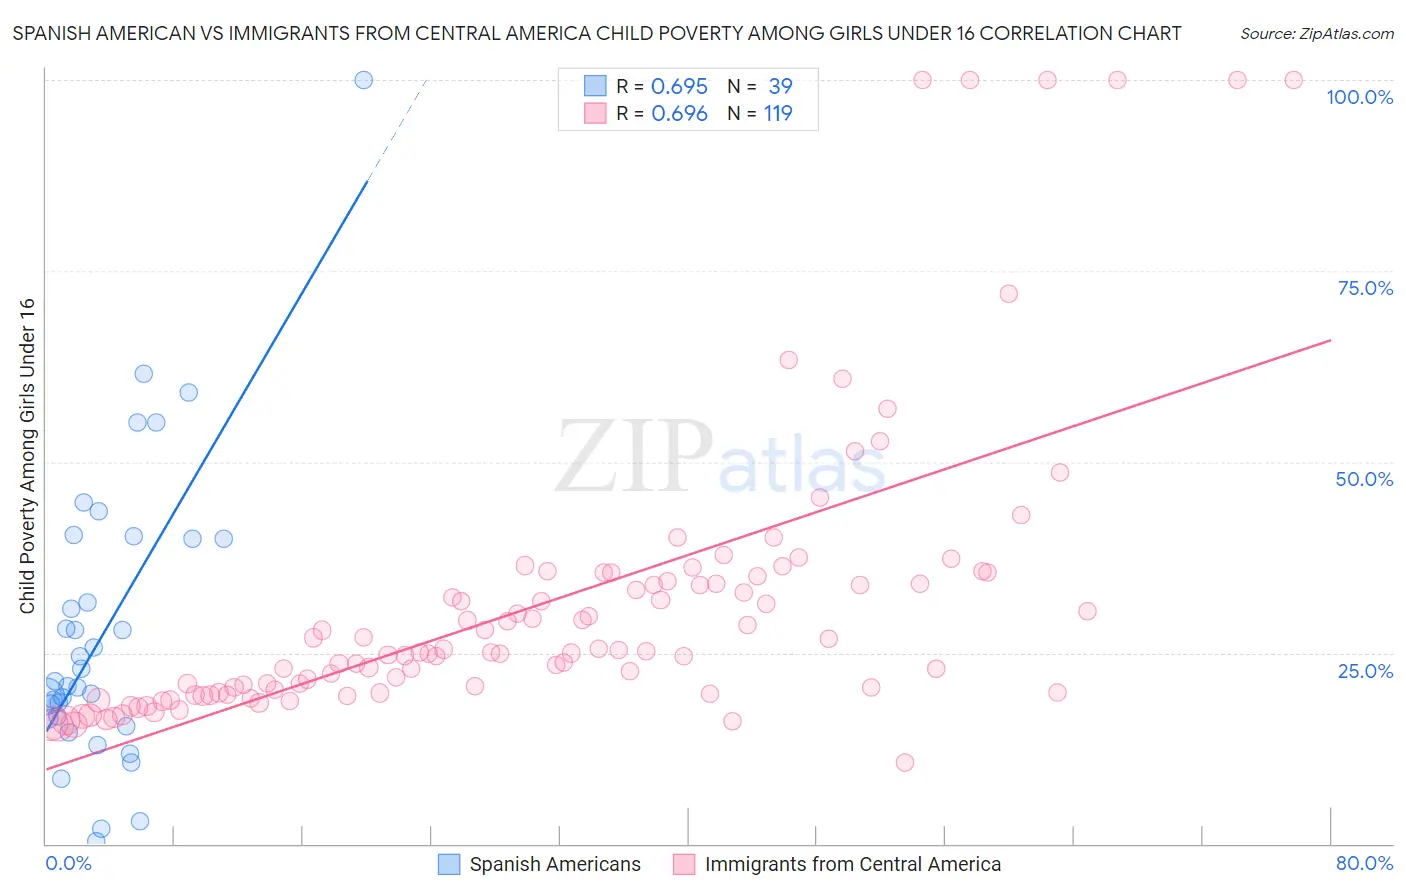 Spanish American vs Immigrants from Central America Child Poverty Among Girls Under 16